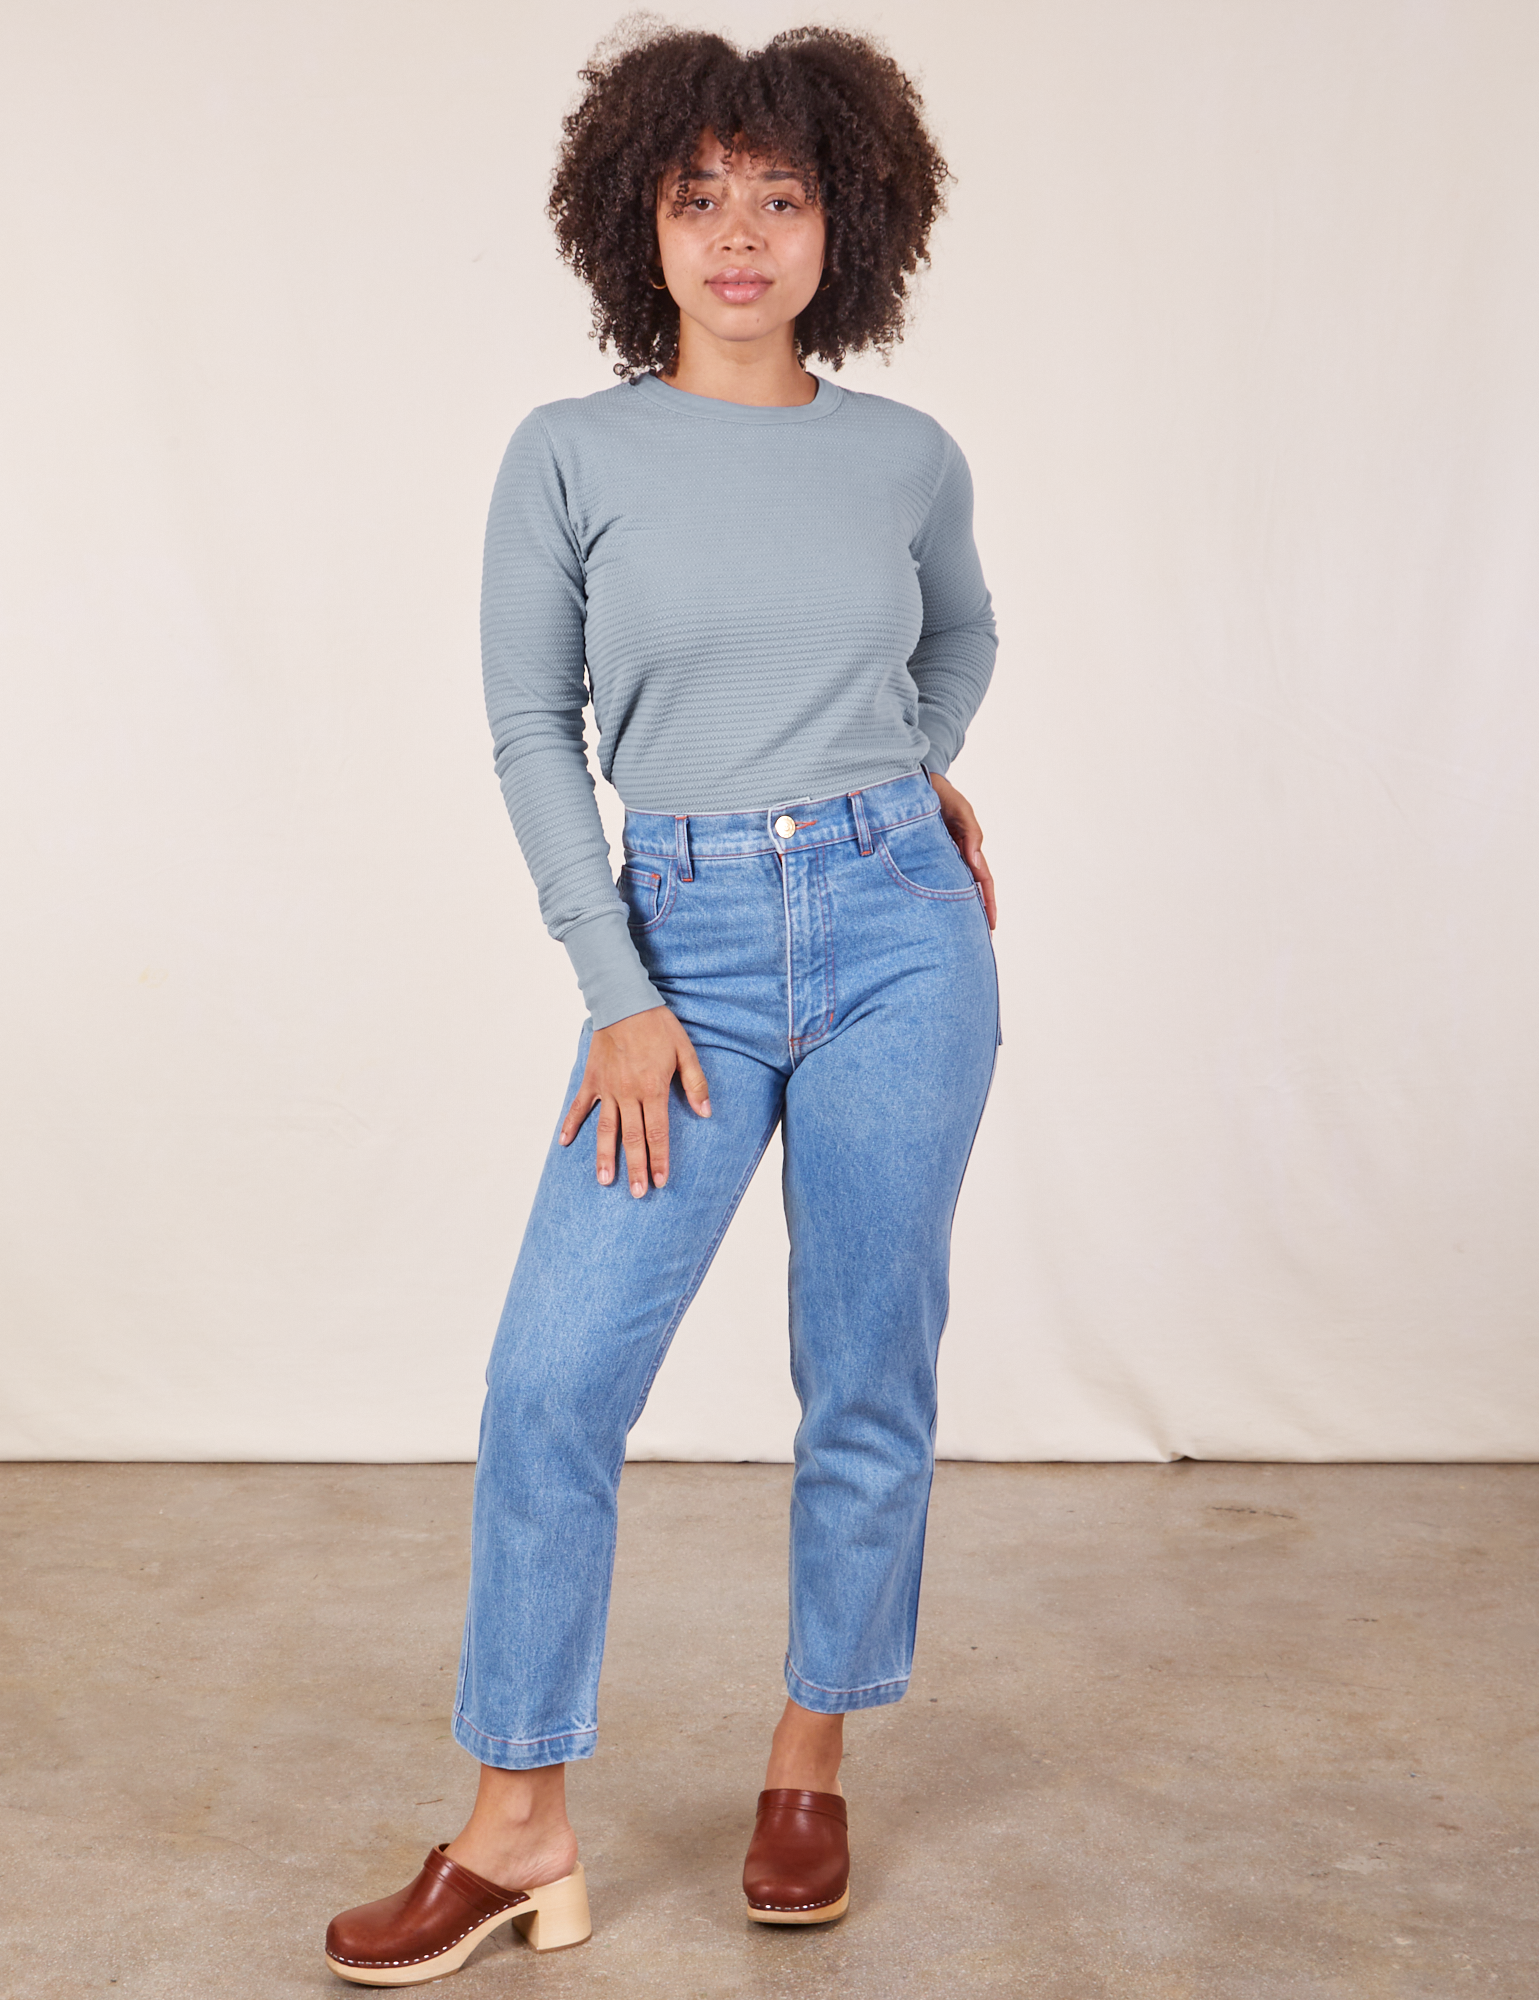 Gabi is wearing Honeycomb Thermal in Periwinkle and light wash Frontier Jeans